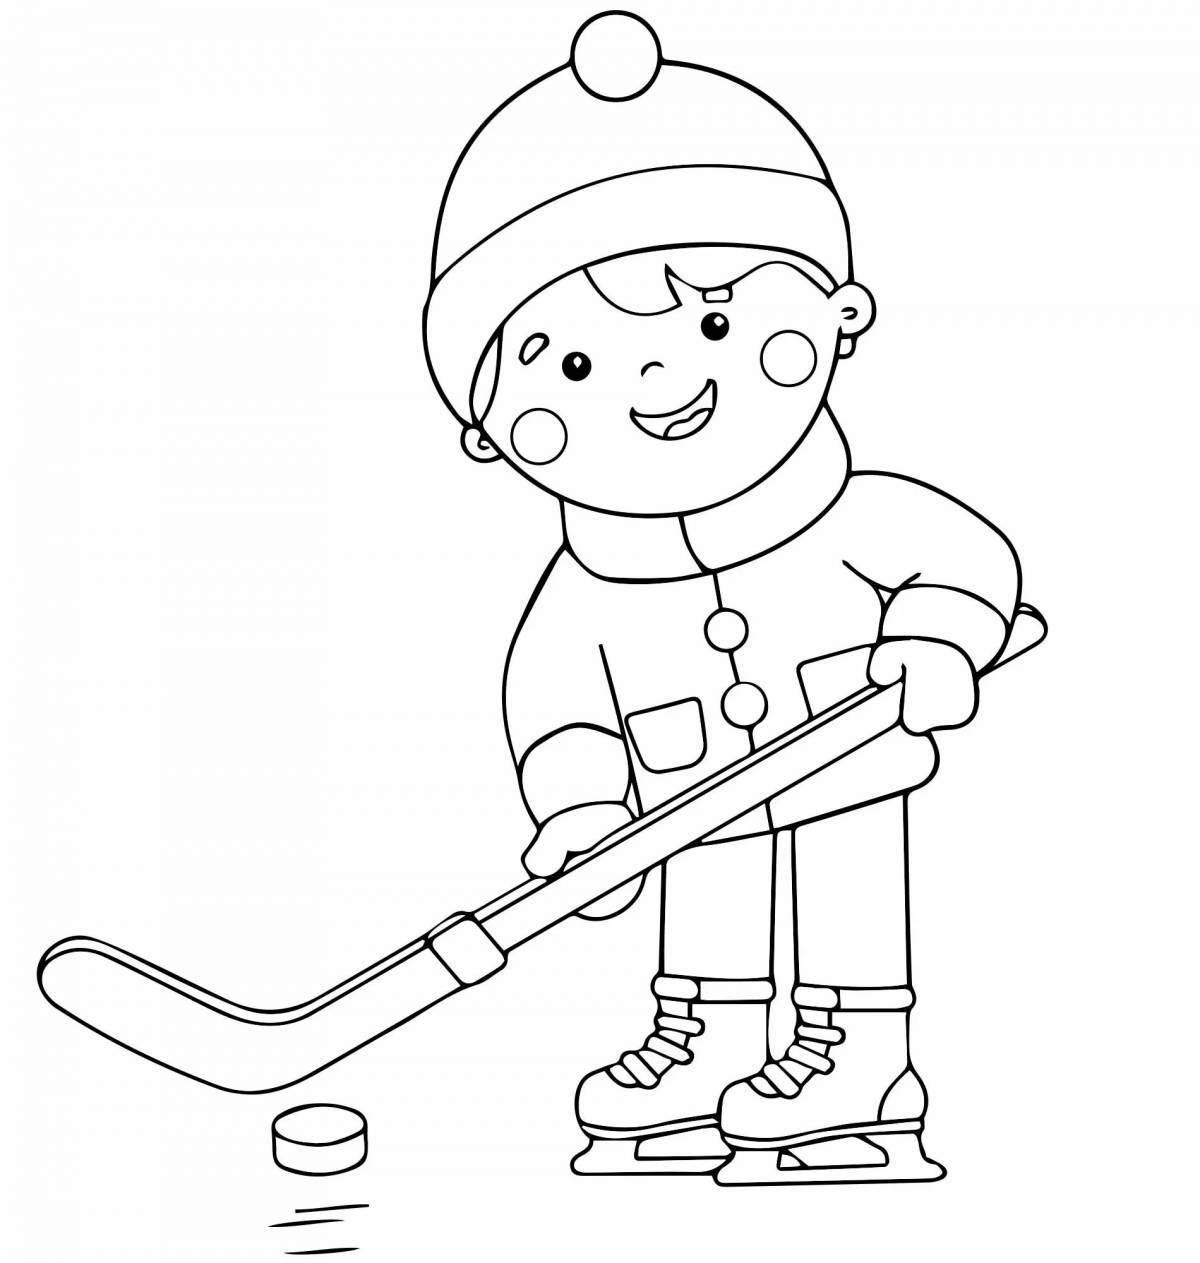 Superb winter sports coloring page